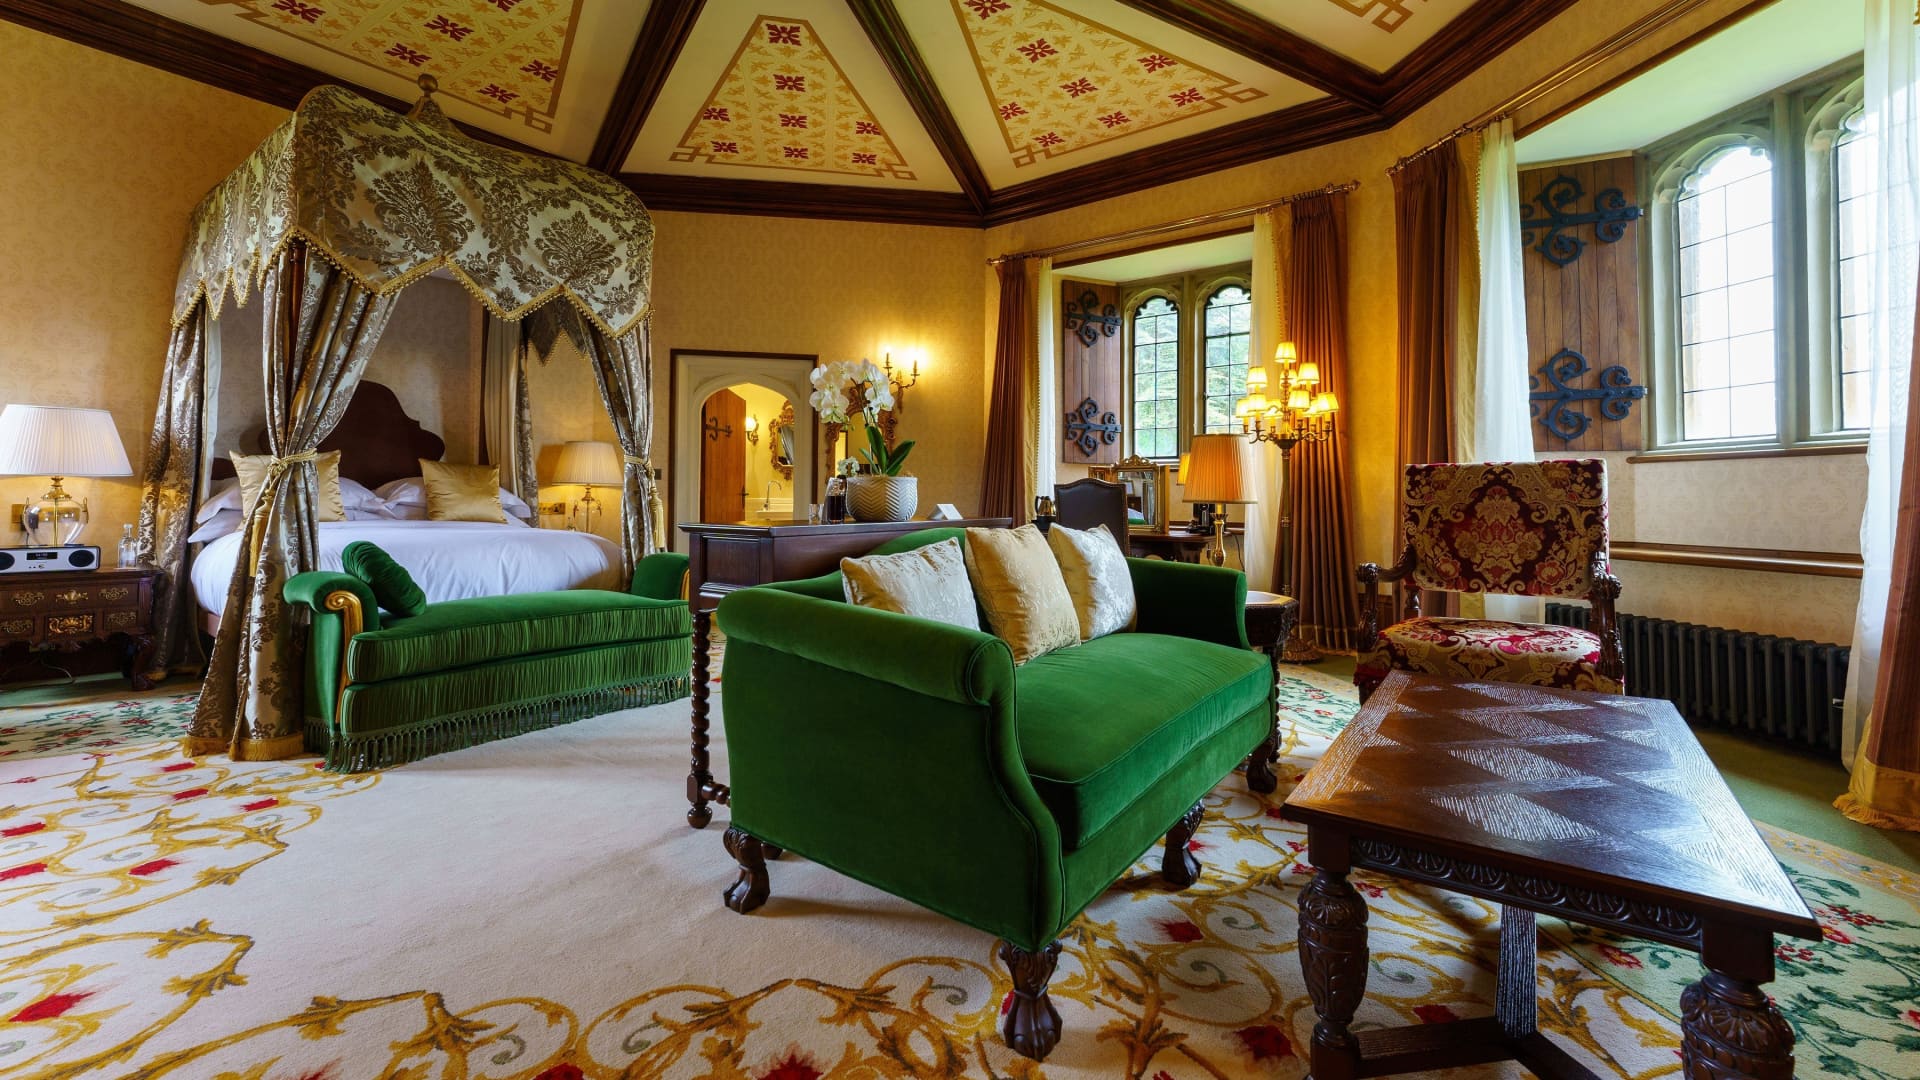 Rates for the King Henry VIII Suite at Thornbury Castle — where Henry VIII and his second wife, Anne Boleyn, stayed — start from 569 British pounds ($685) per night.